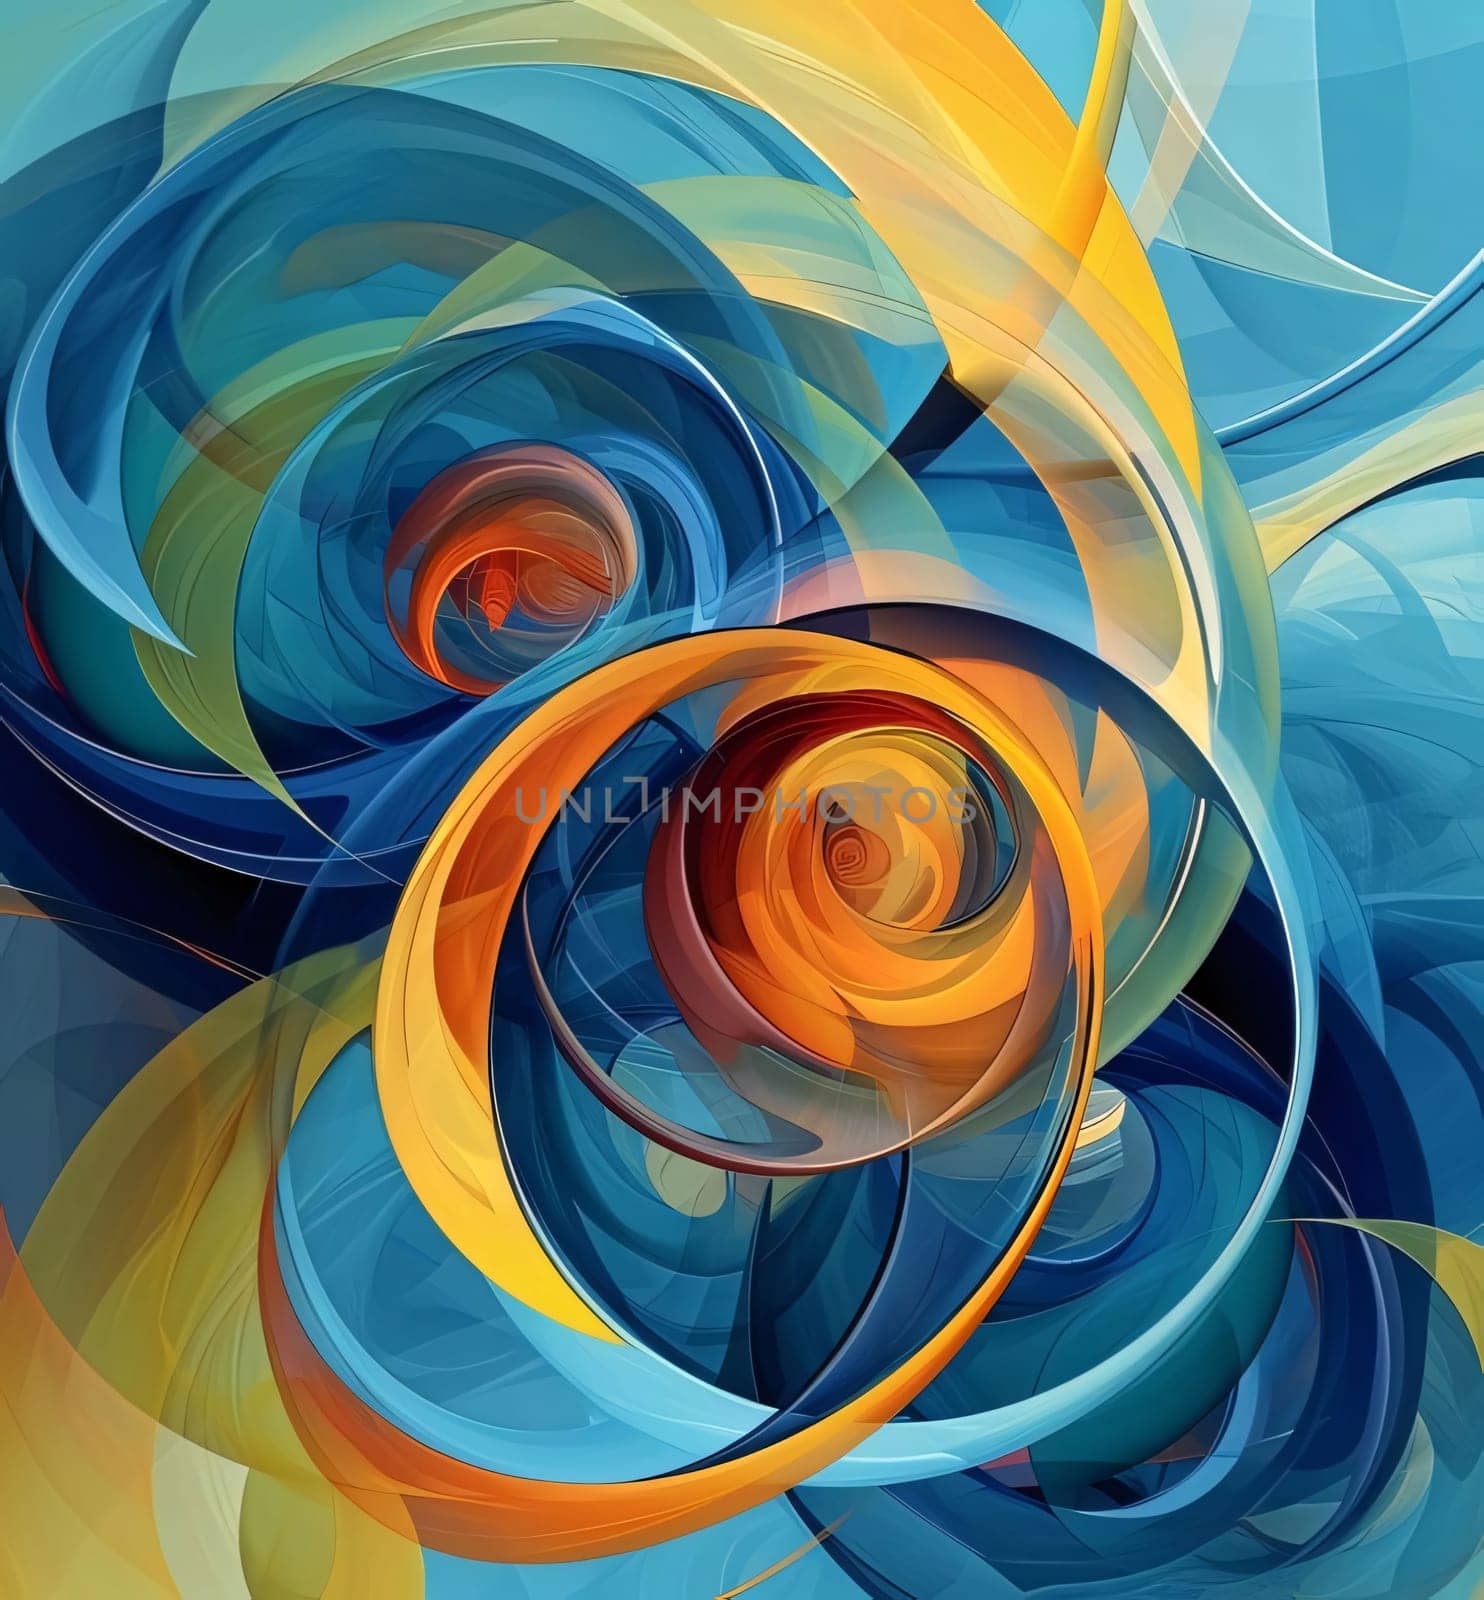 abstract background with blue, orange, yellow and orange swirls by ThemesS